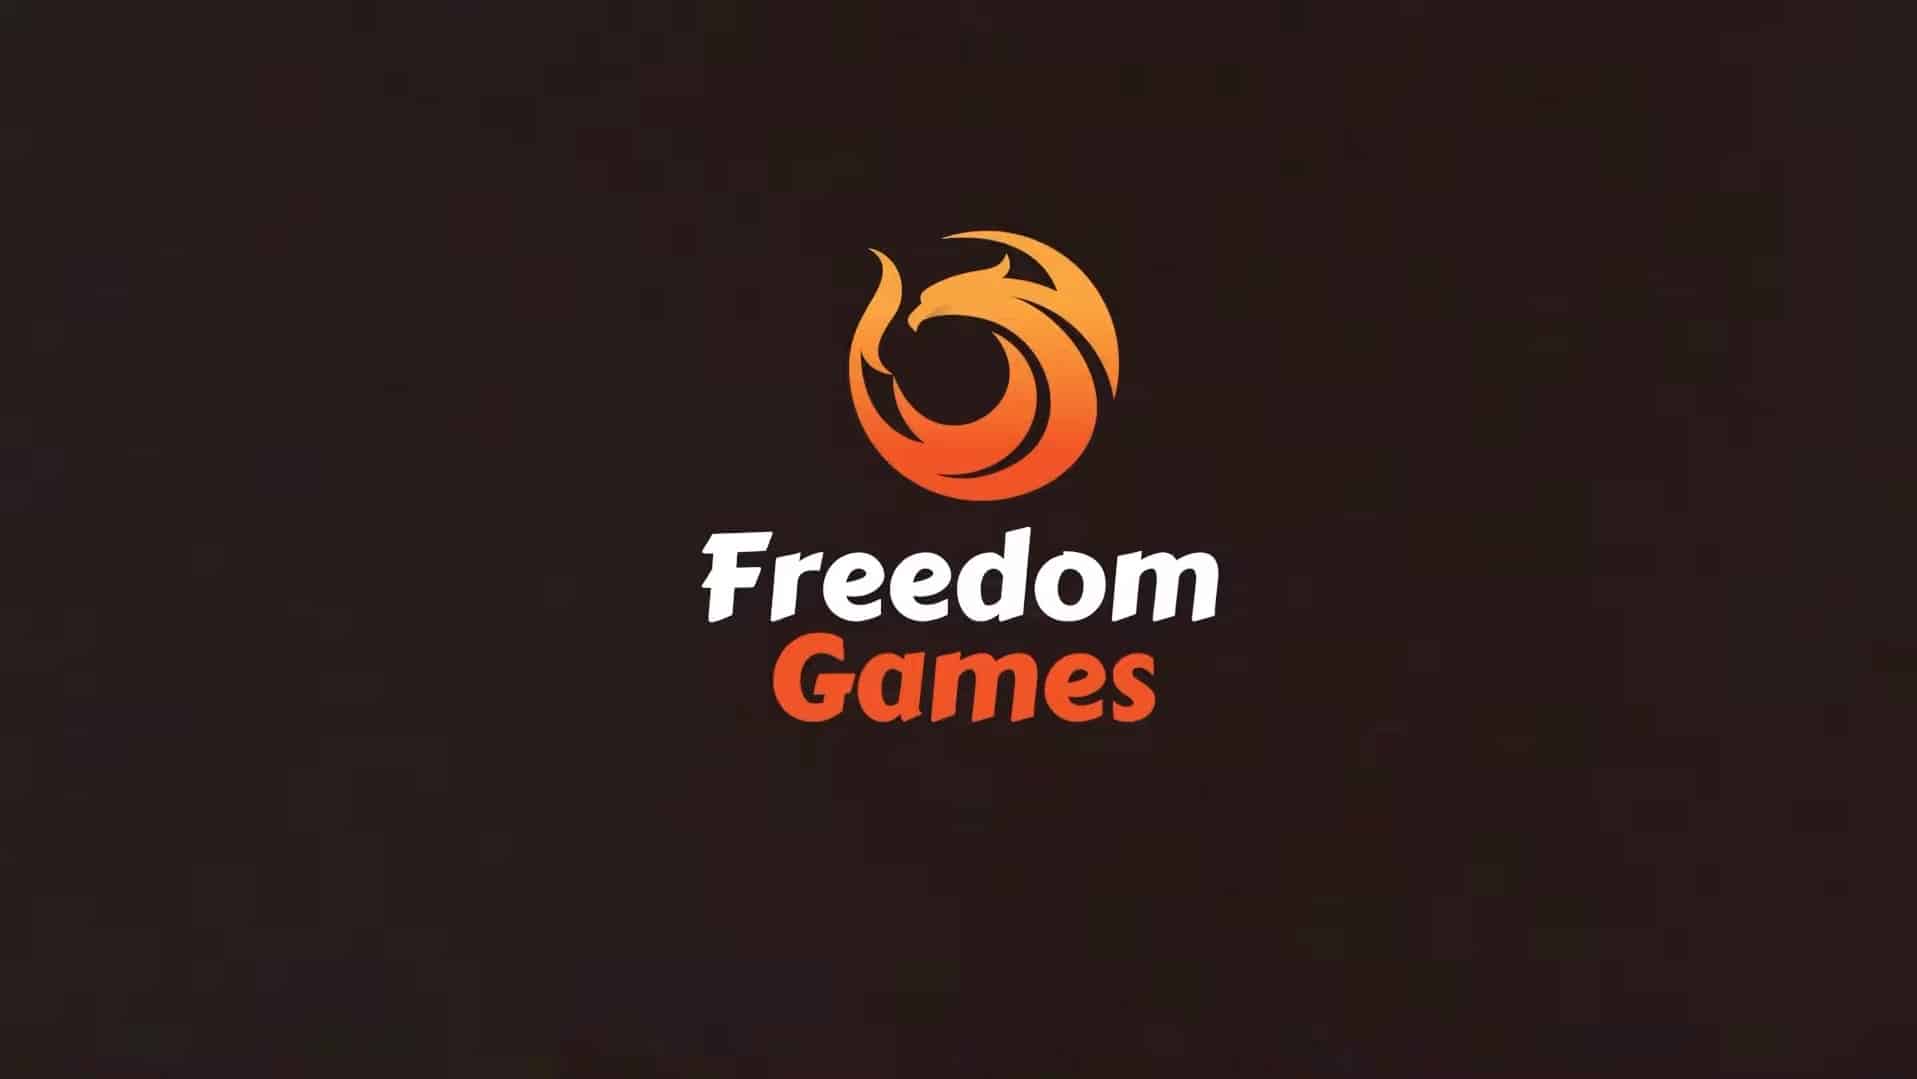 earn your freedom 0.03 game